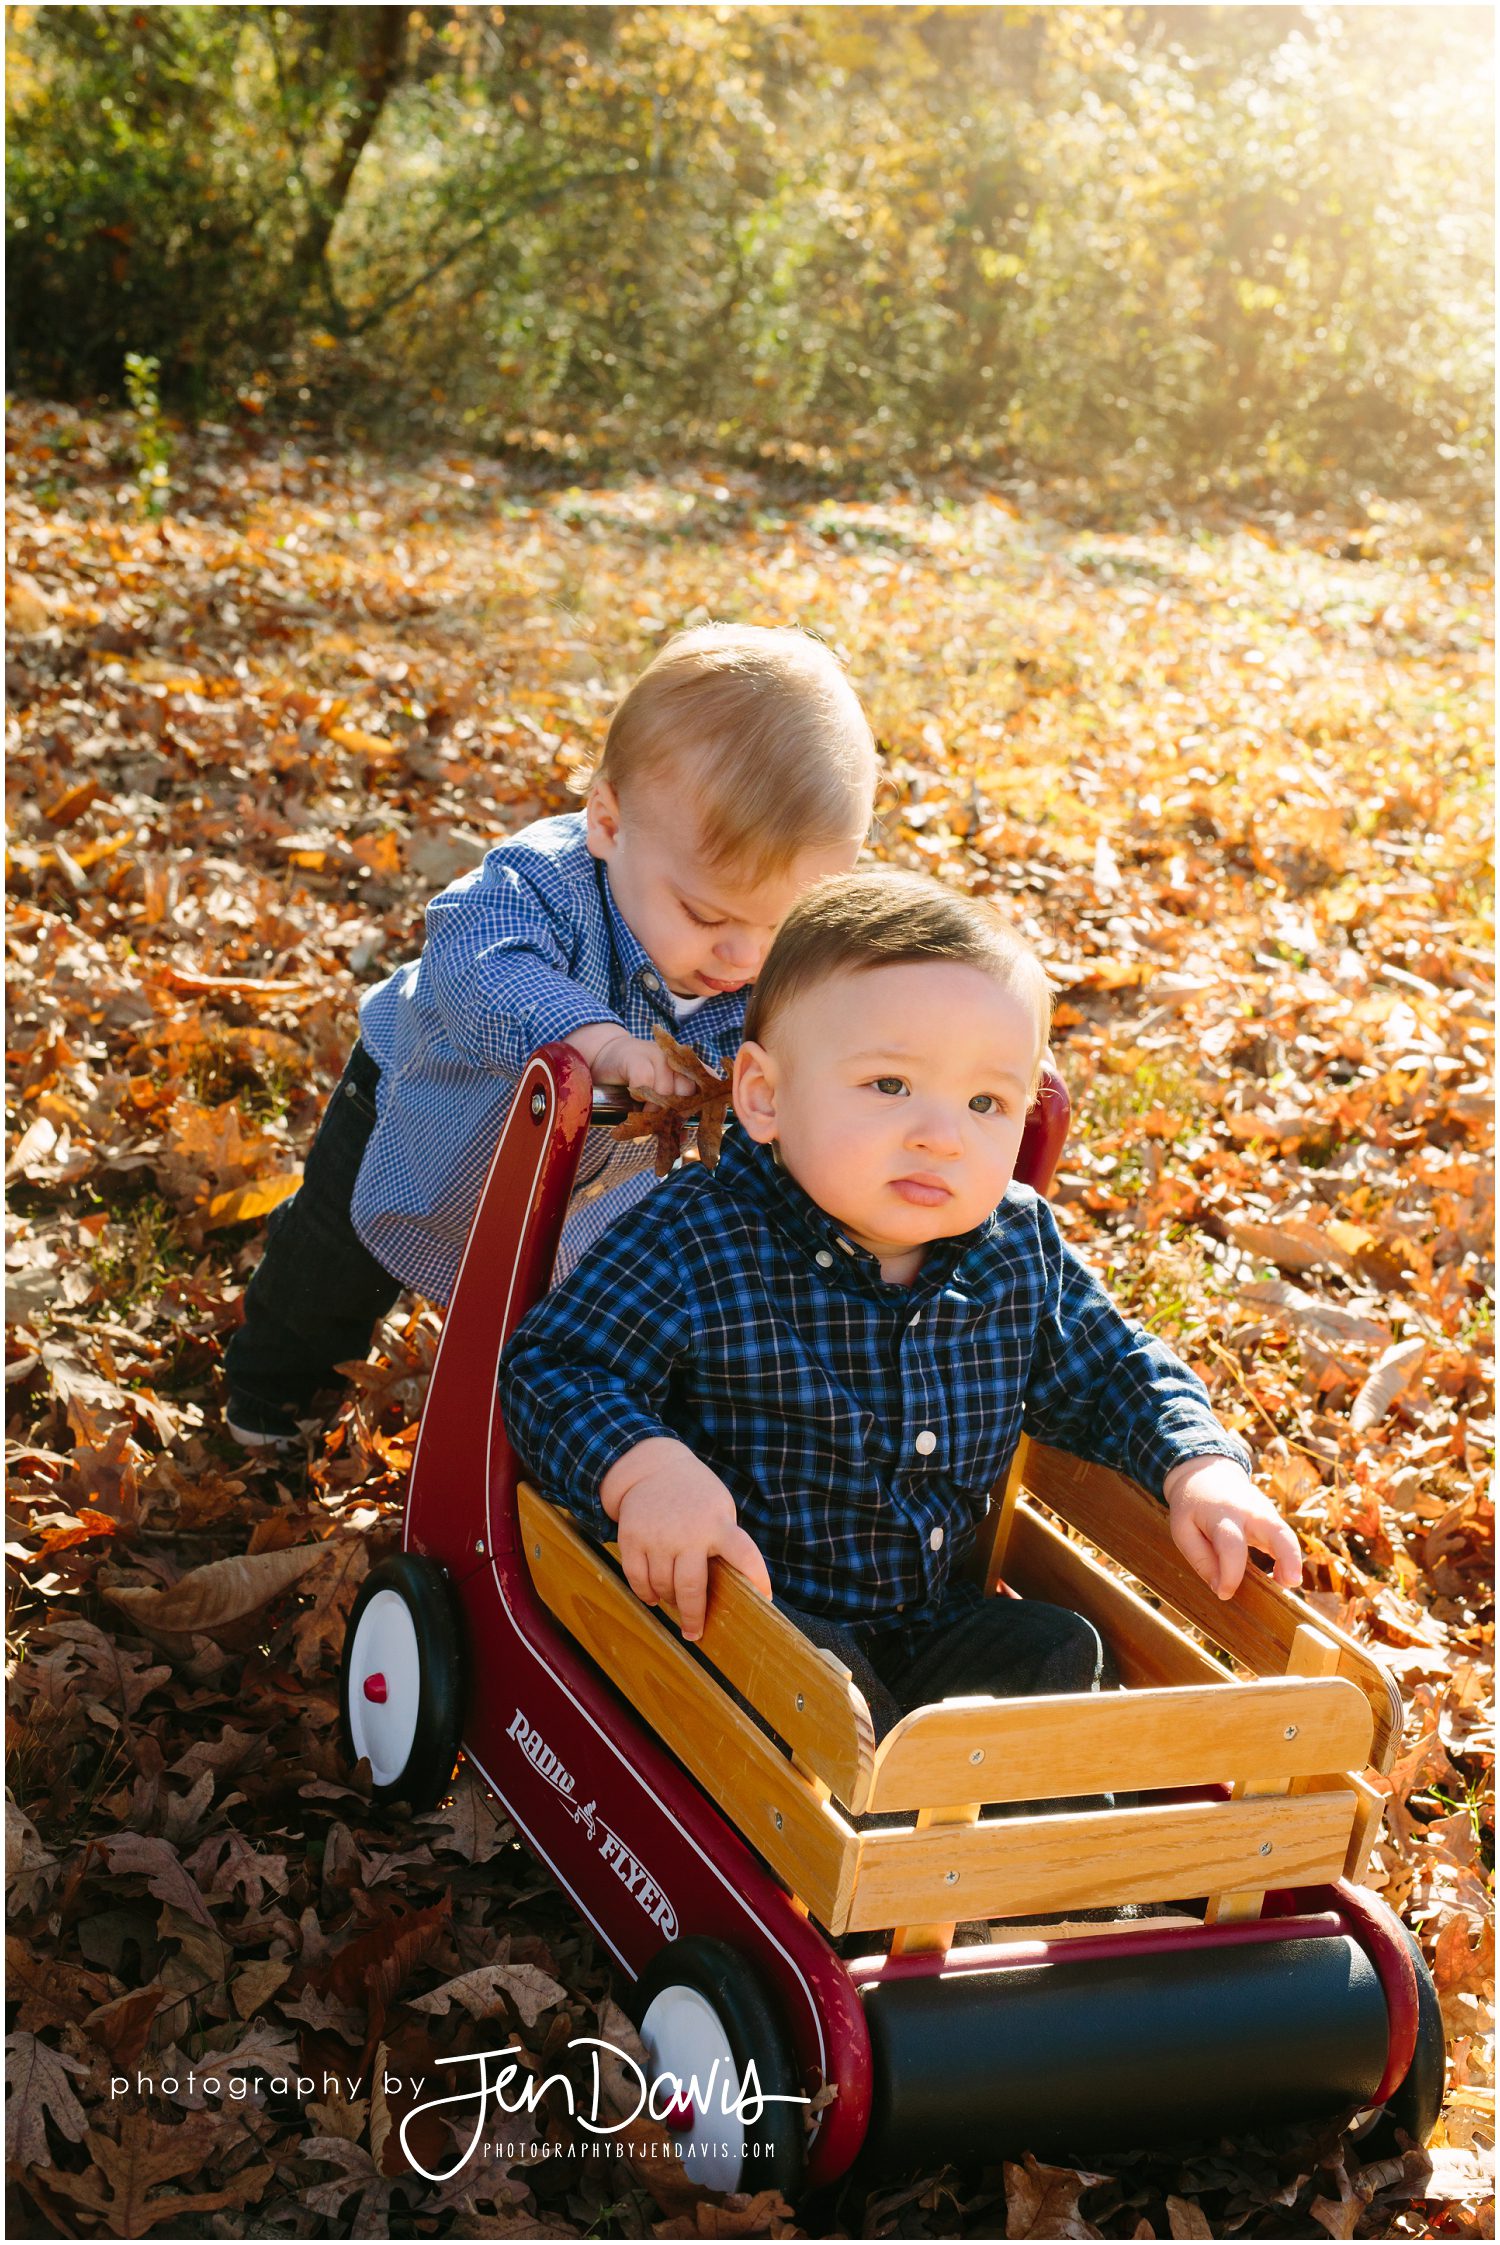 twins pushing each other in the wagon